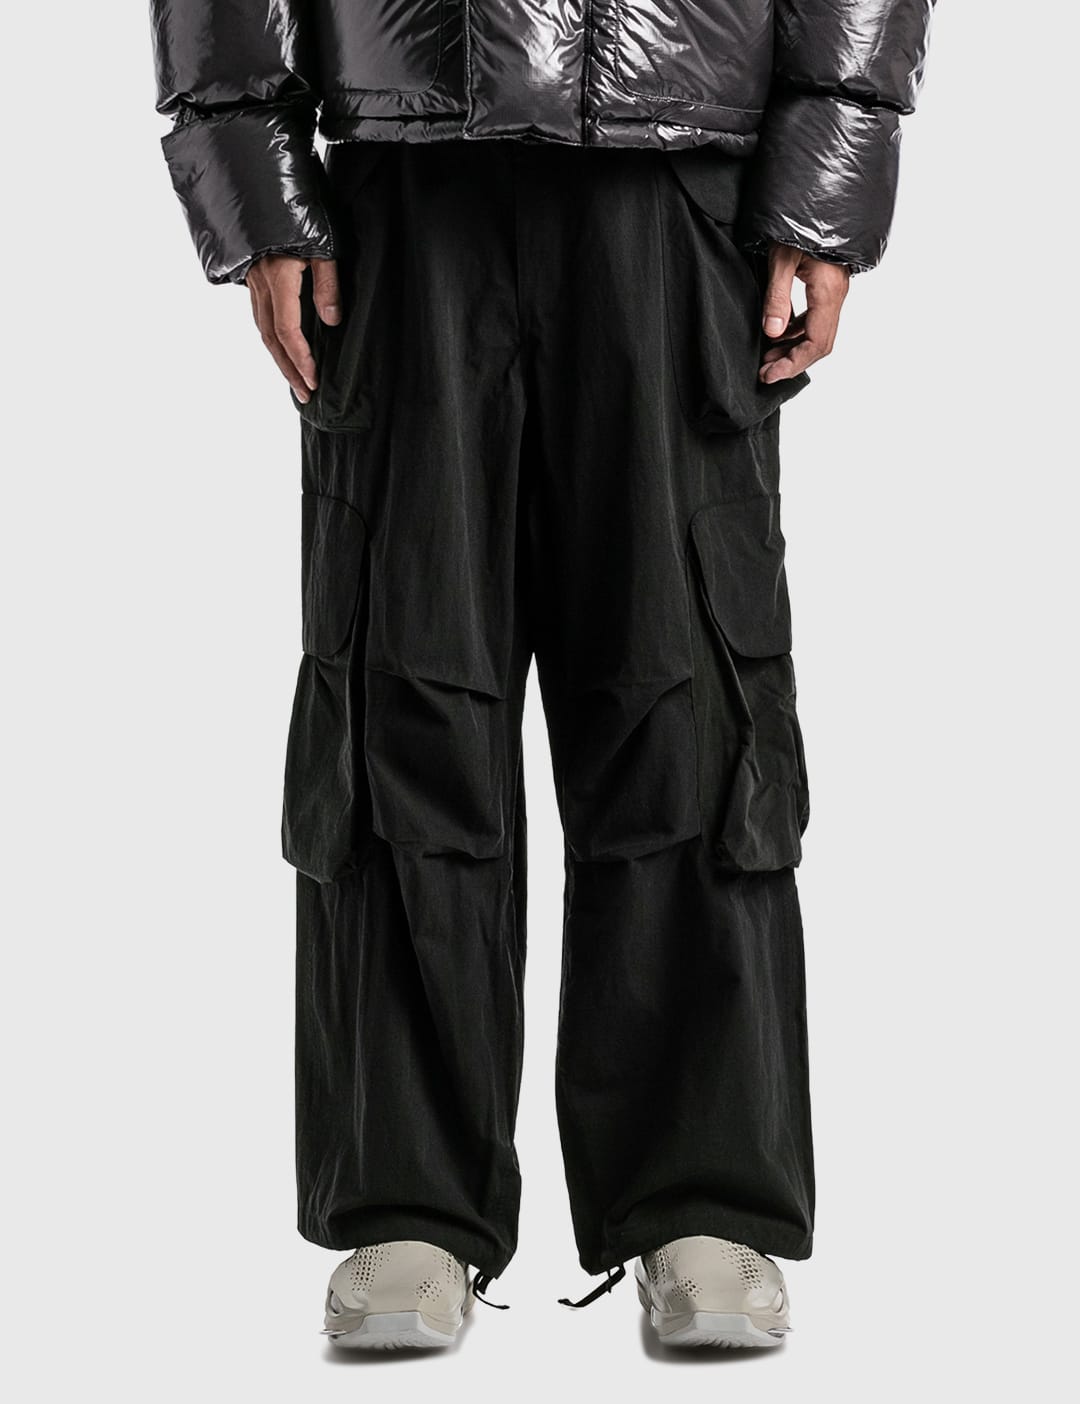 Entire Studios - GOCAR CARGO PANTS | HBX - Globally Curated 